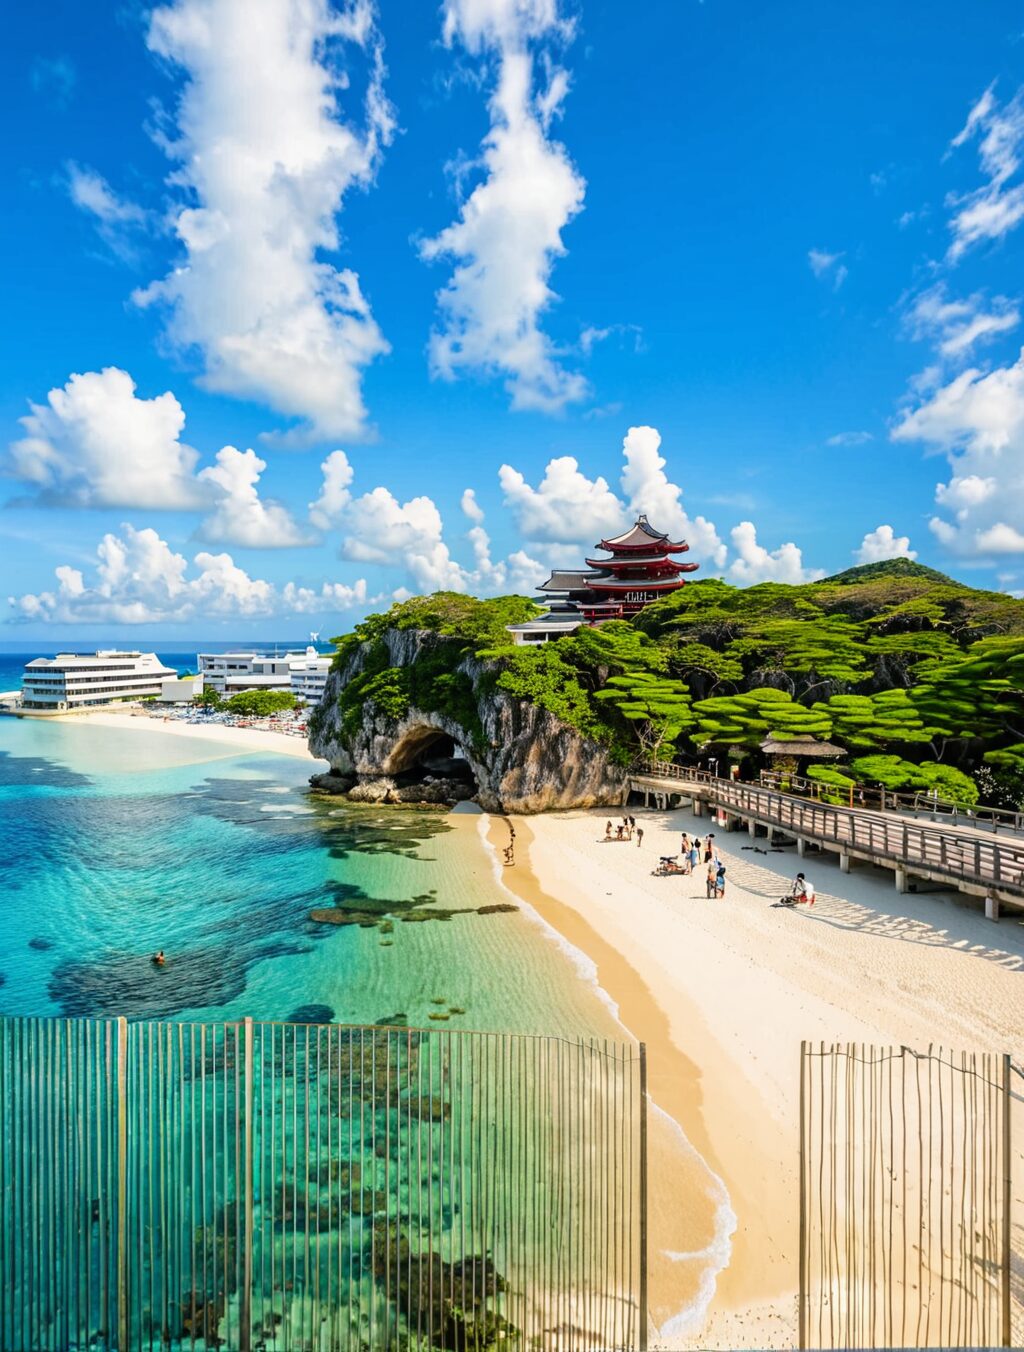 when is the best time to visit okinawa japan